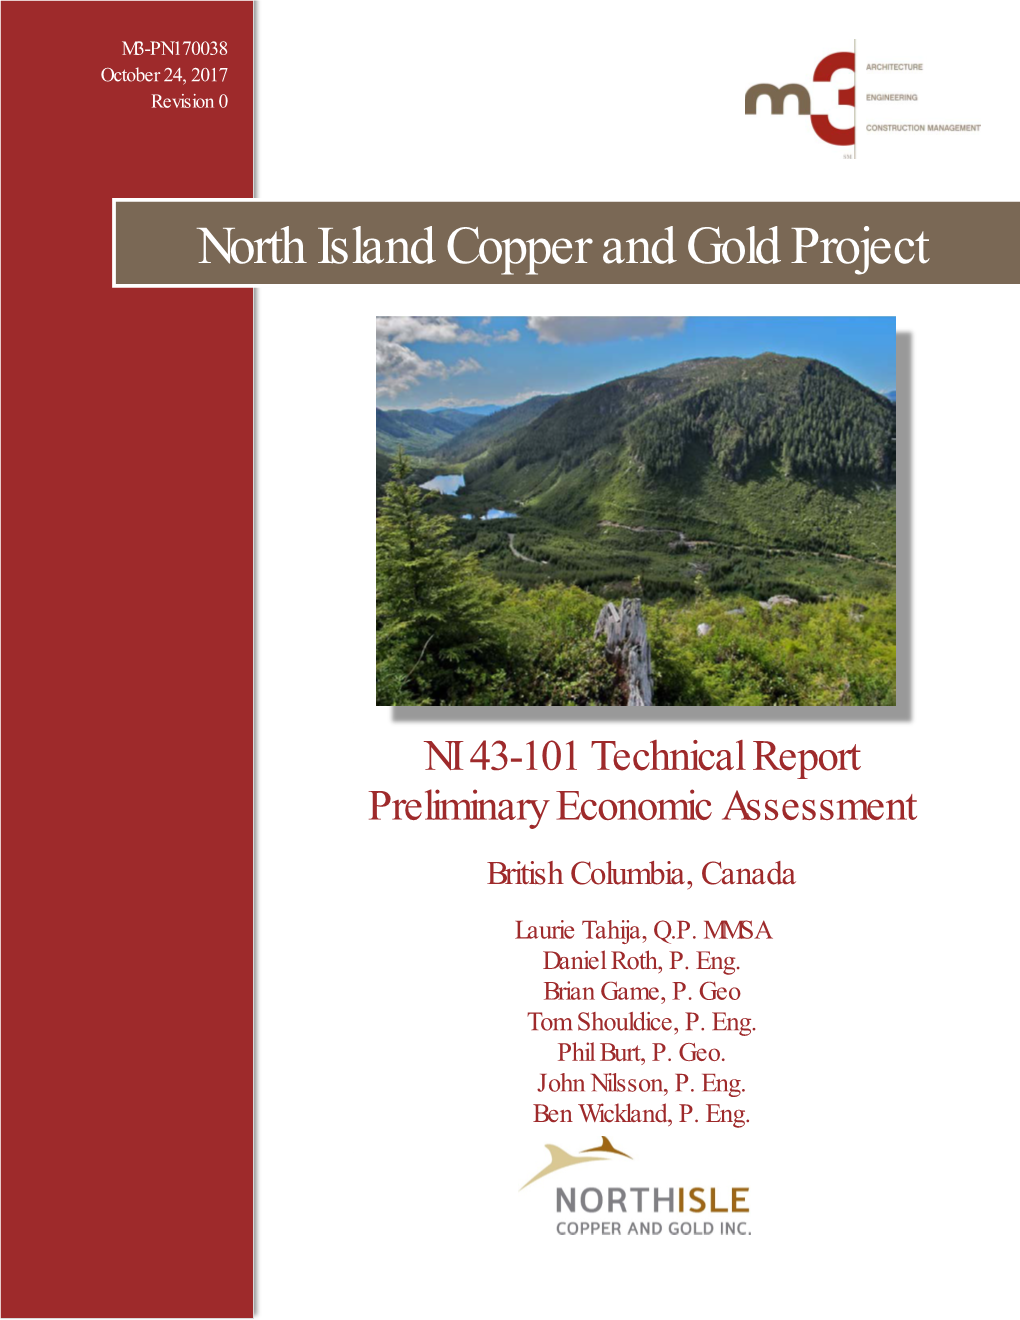 North Island Copper and Gold Project